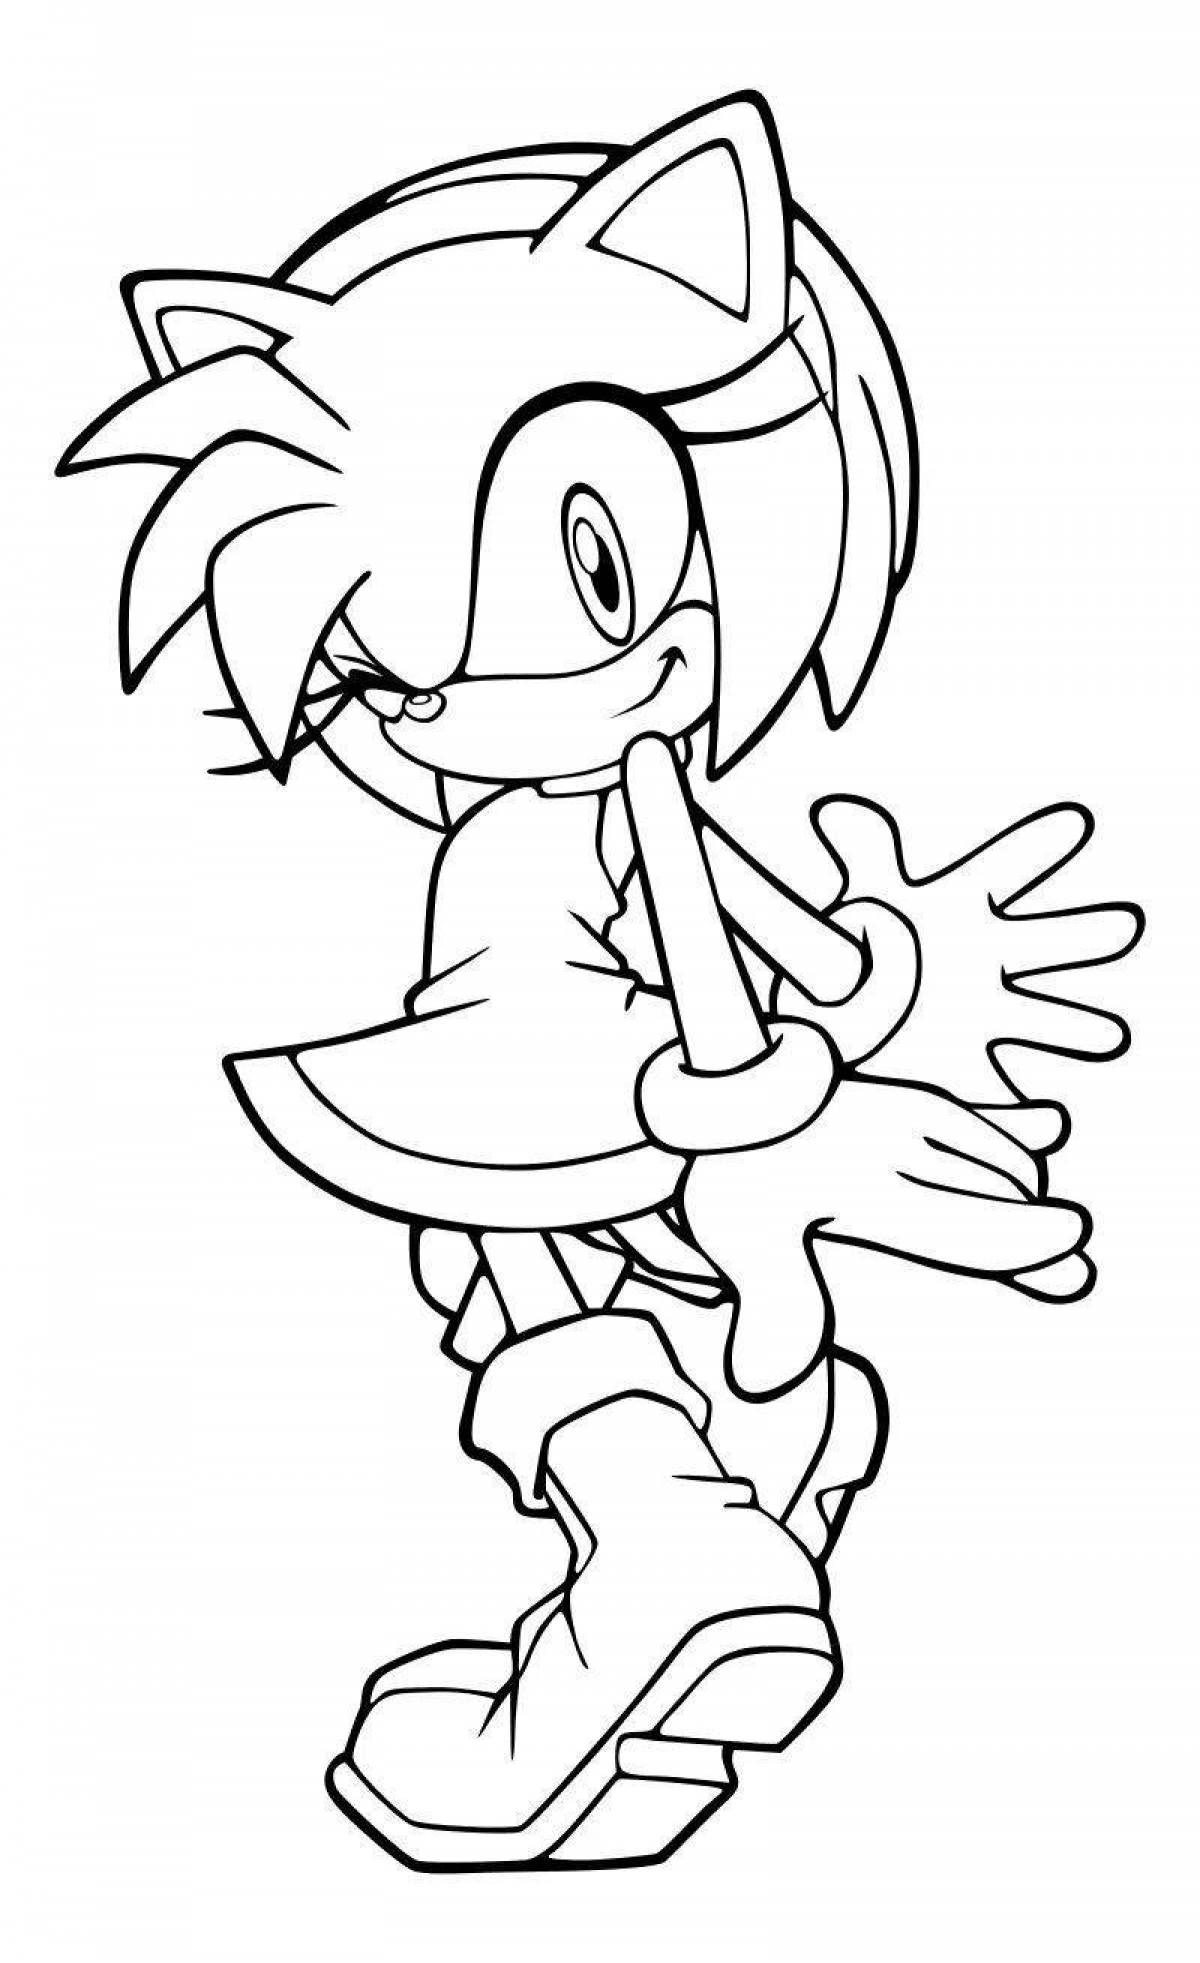 Sonic Amy's intriguing coloring book